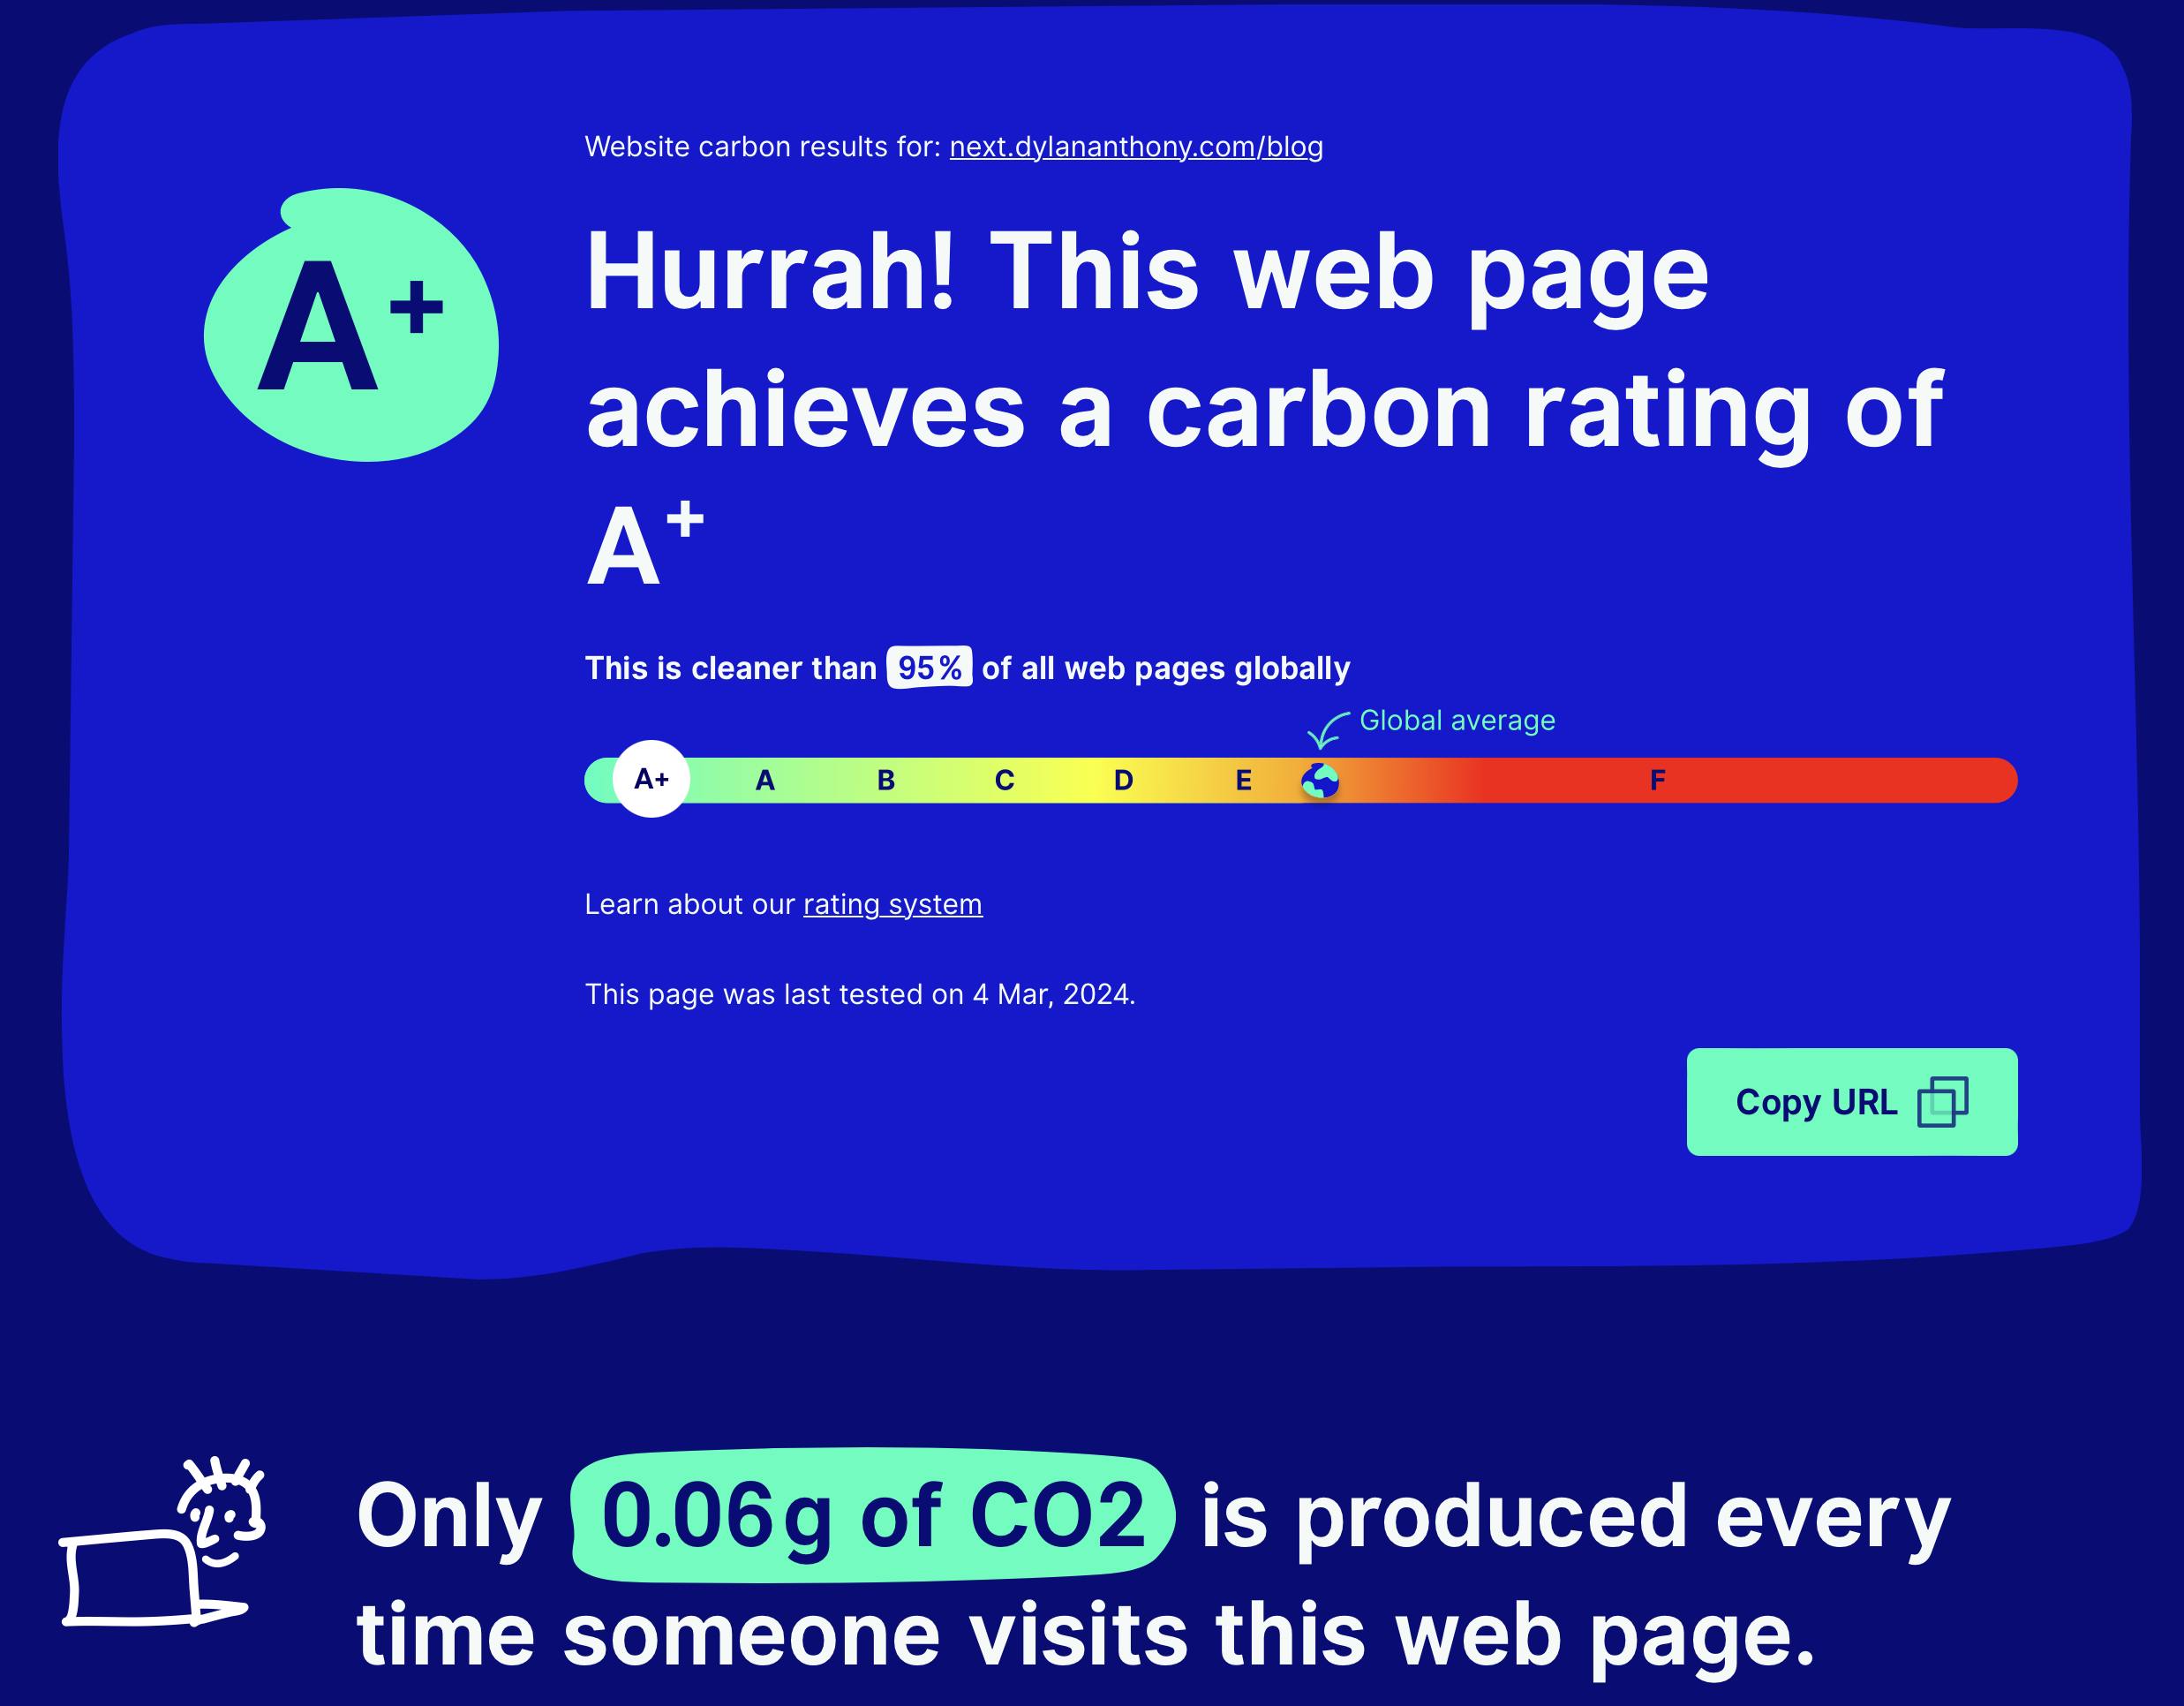 Another screenshot of websitecarbon.com, this time my website gets an A+.   This is cleaner than 95% of other websites.   Below the scale, the website states "Only 0.06g of CO2 is produced every time someone visits this webpage"